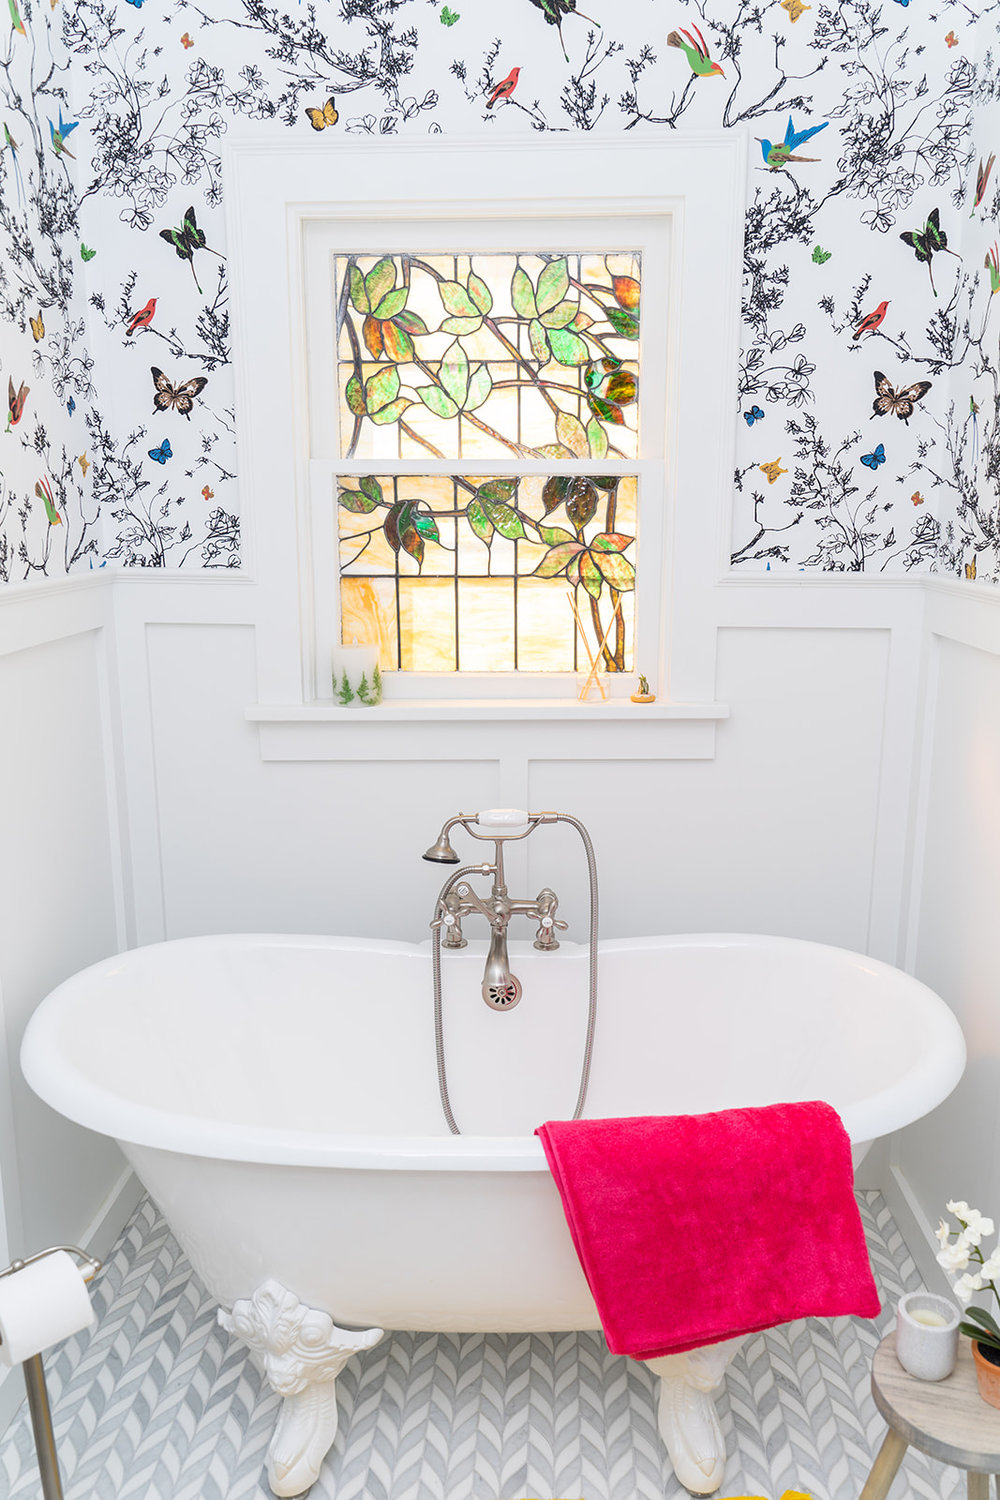 SPRING BATHROOM DECOR IDEAS - Decorate with Tip and More